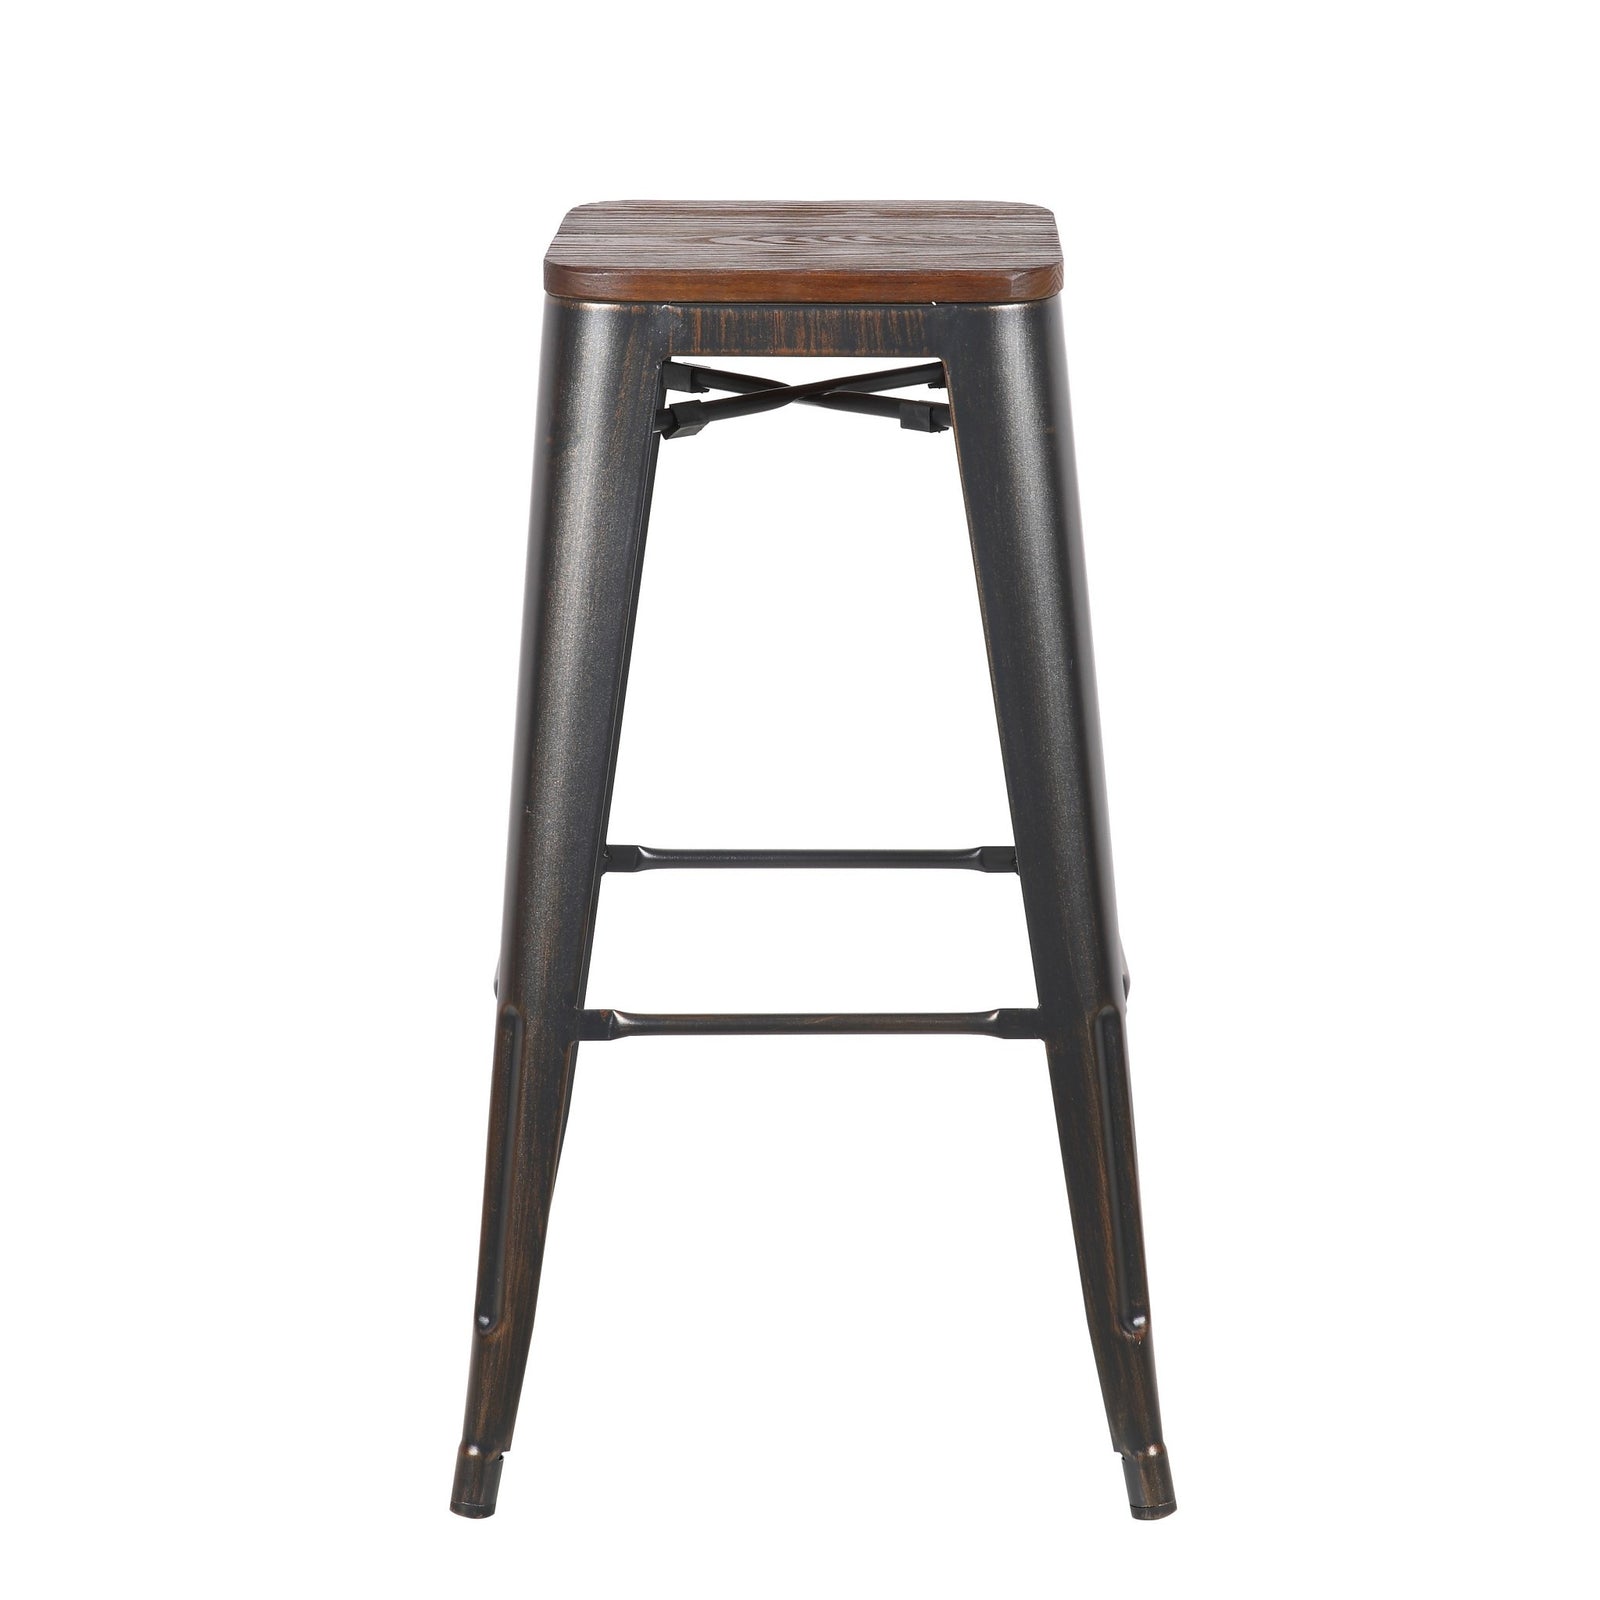 Set of Four Rustic Cafe Wood and Steel Bar Stools